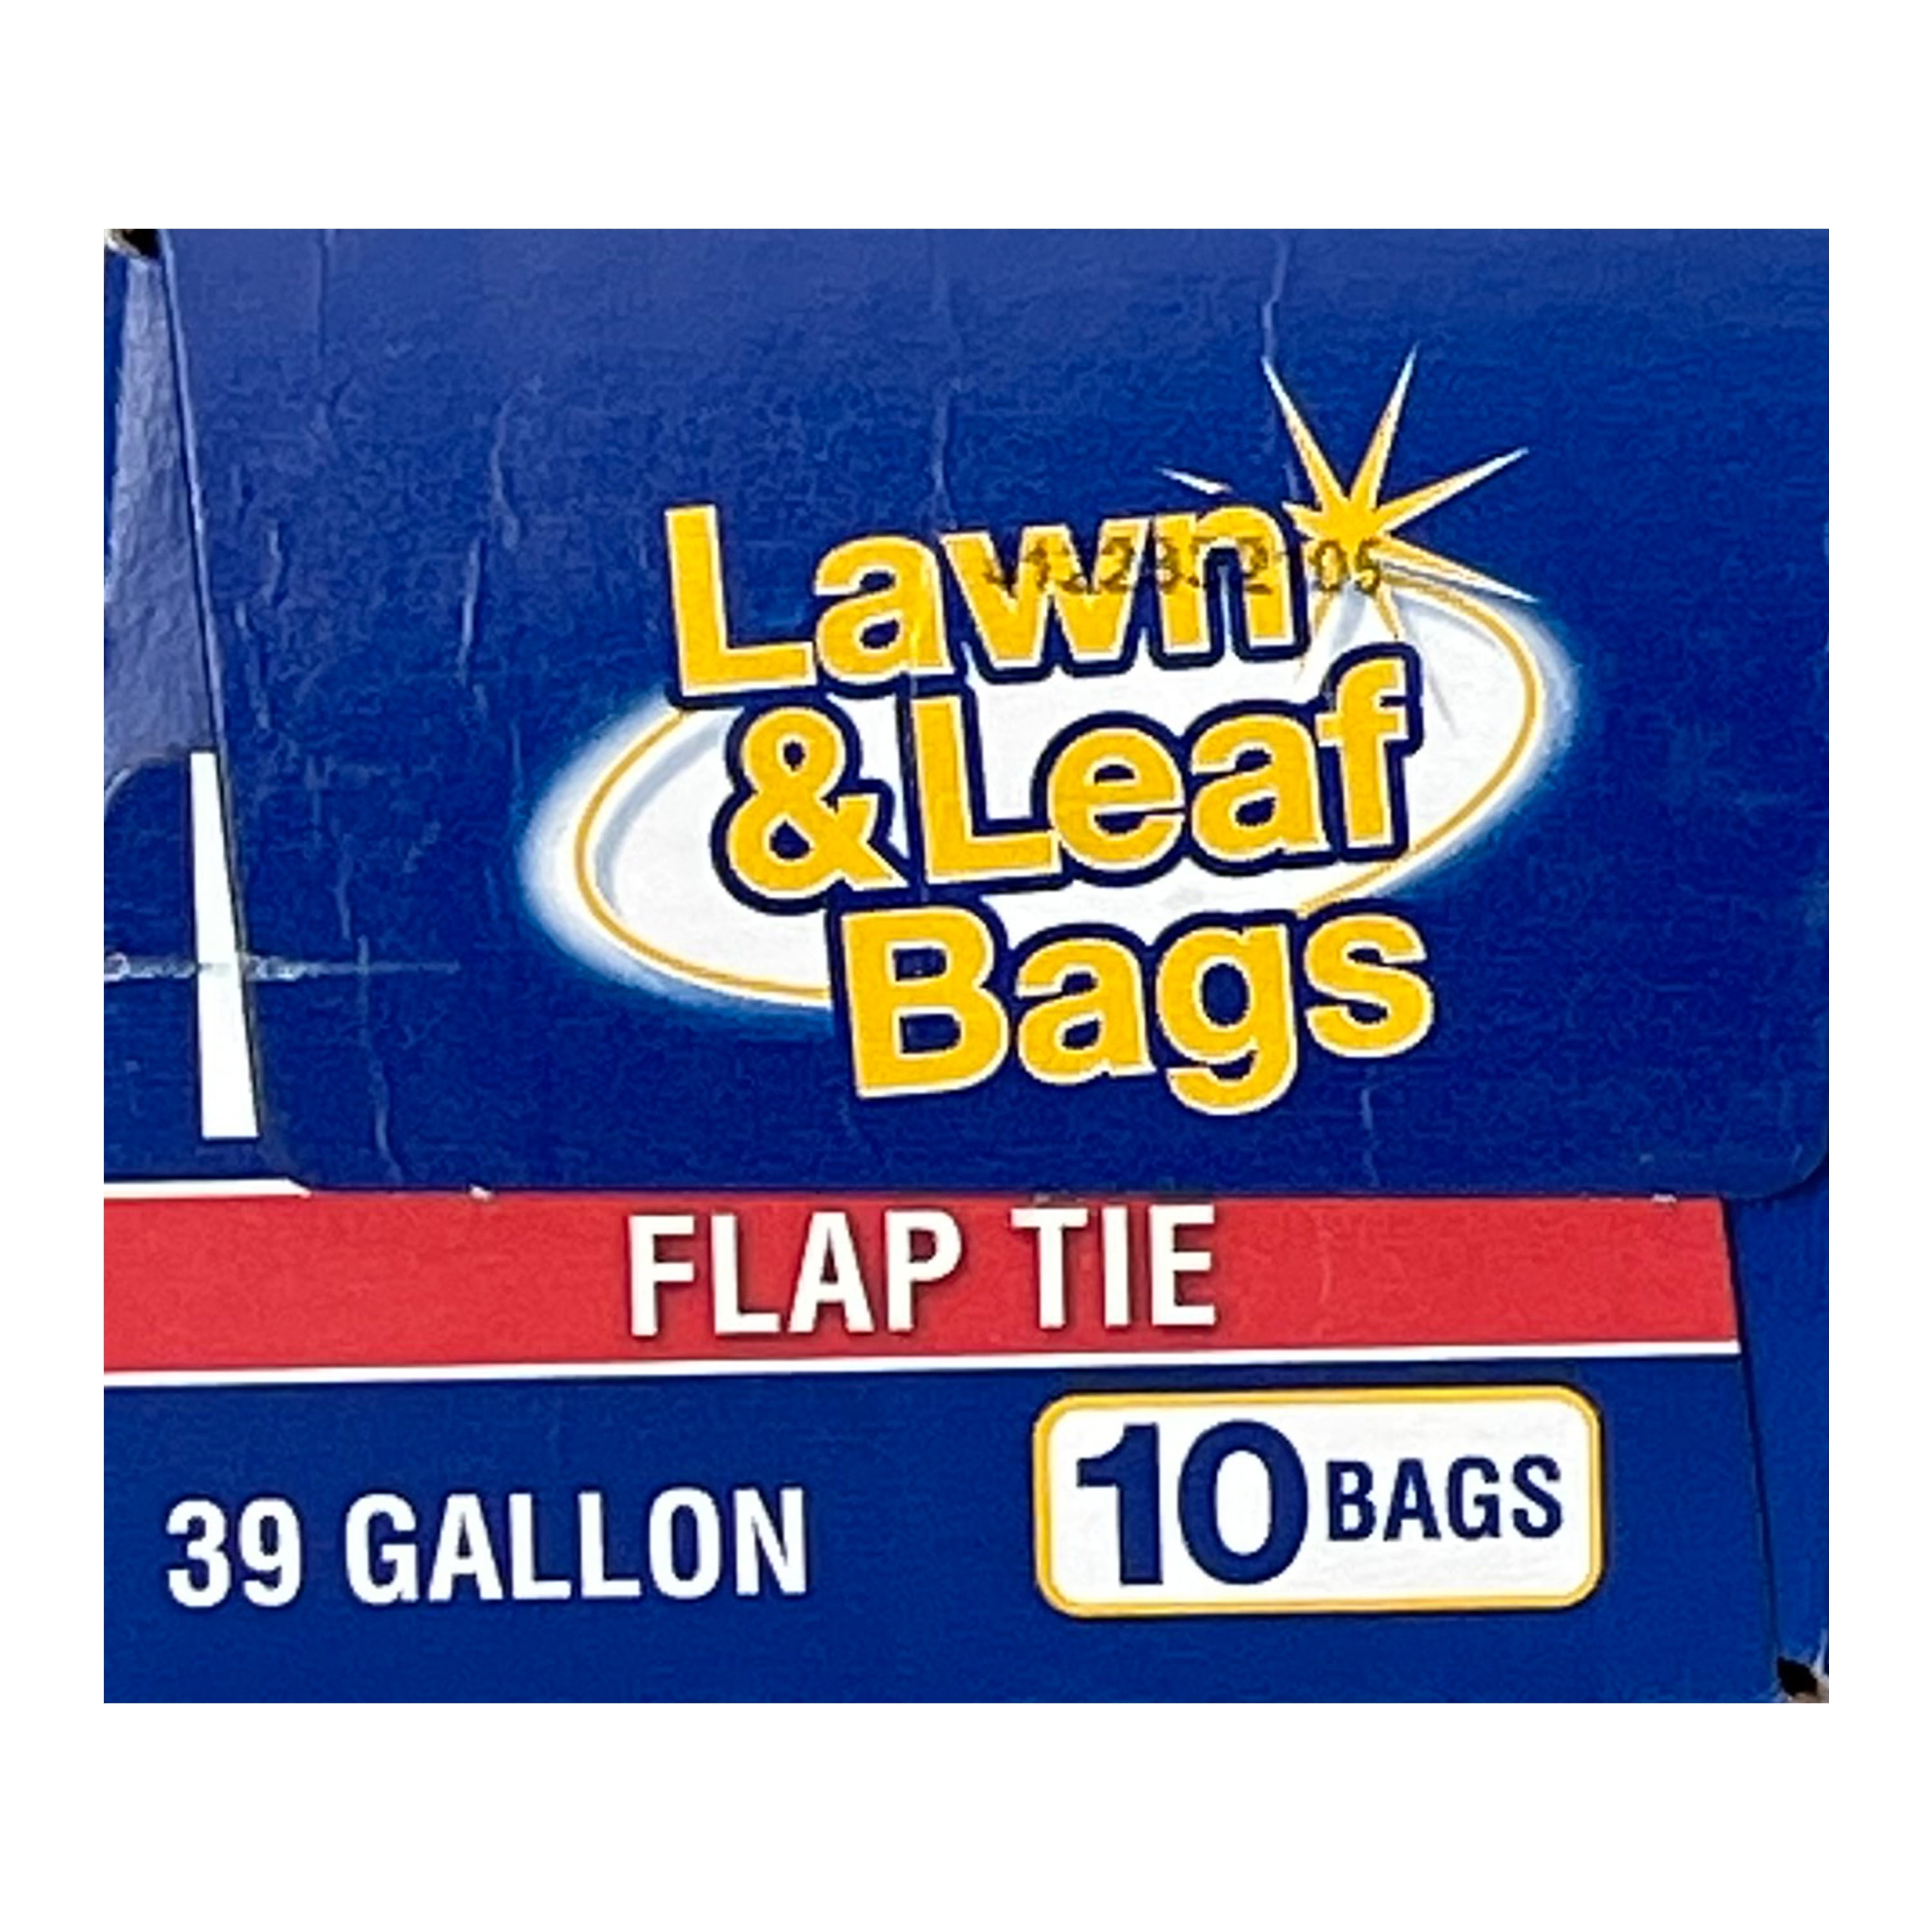 Home Select 39 Gallon Black Lawn and Leaf Trash Bags (5 ct)